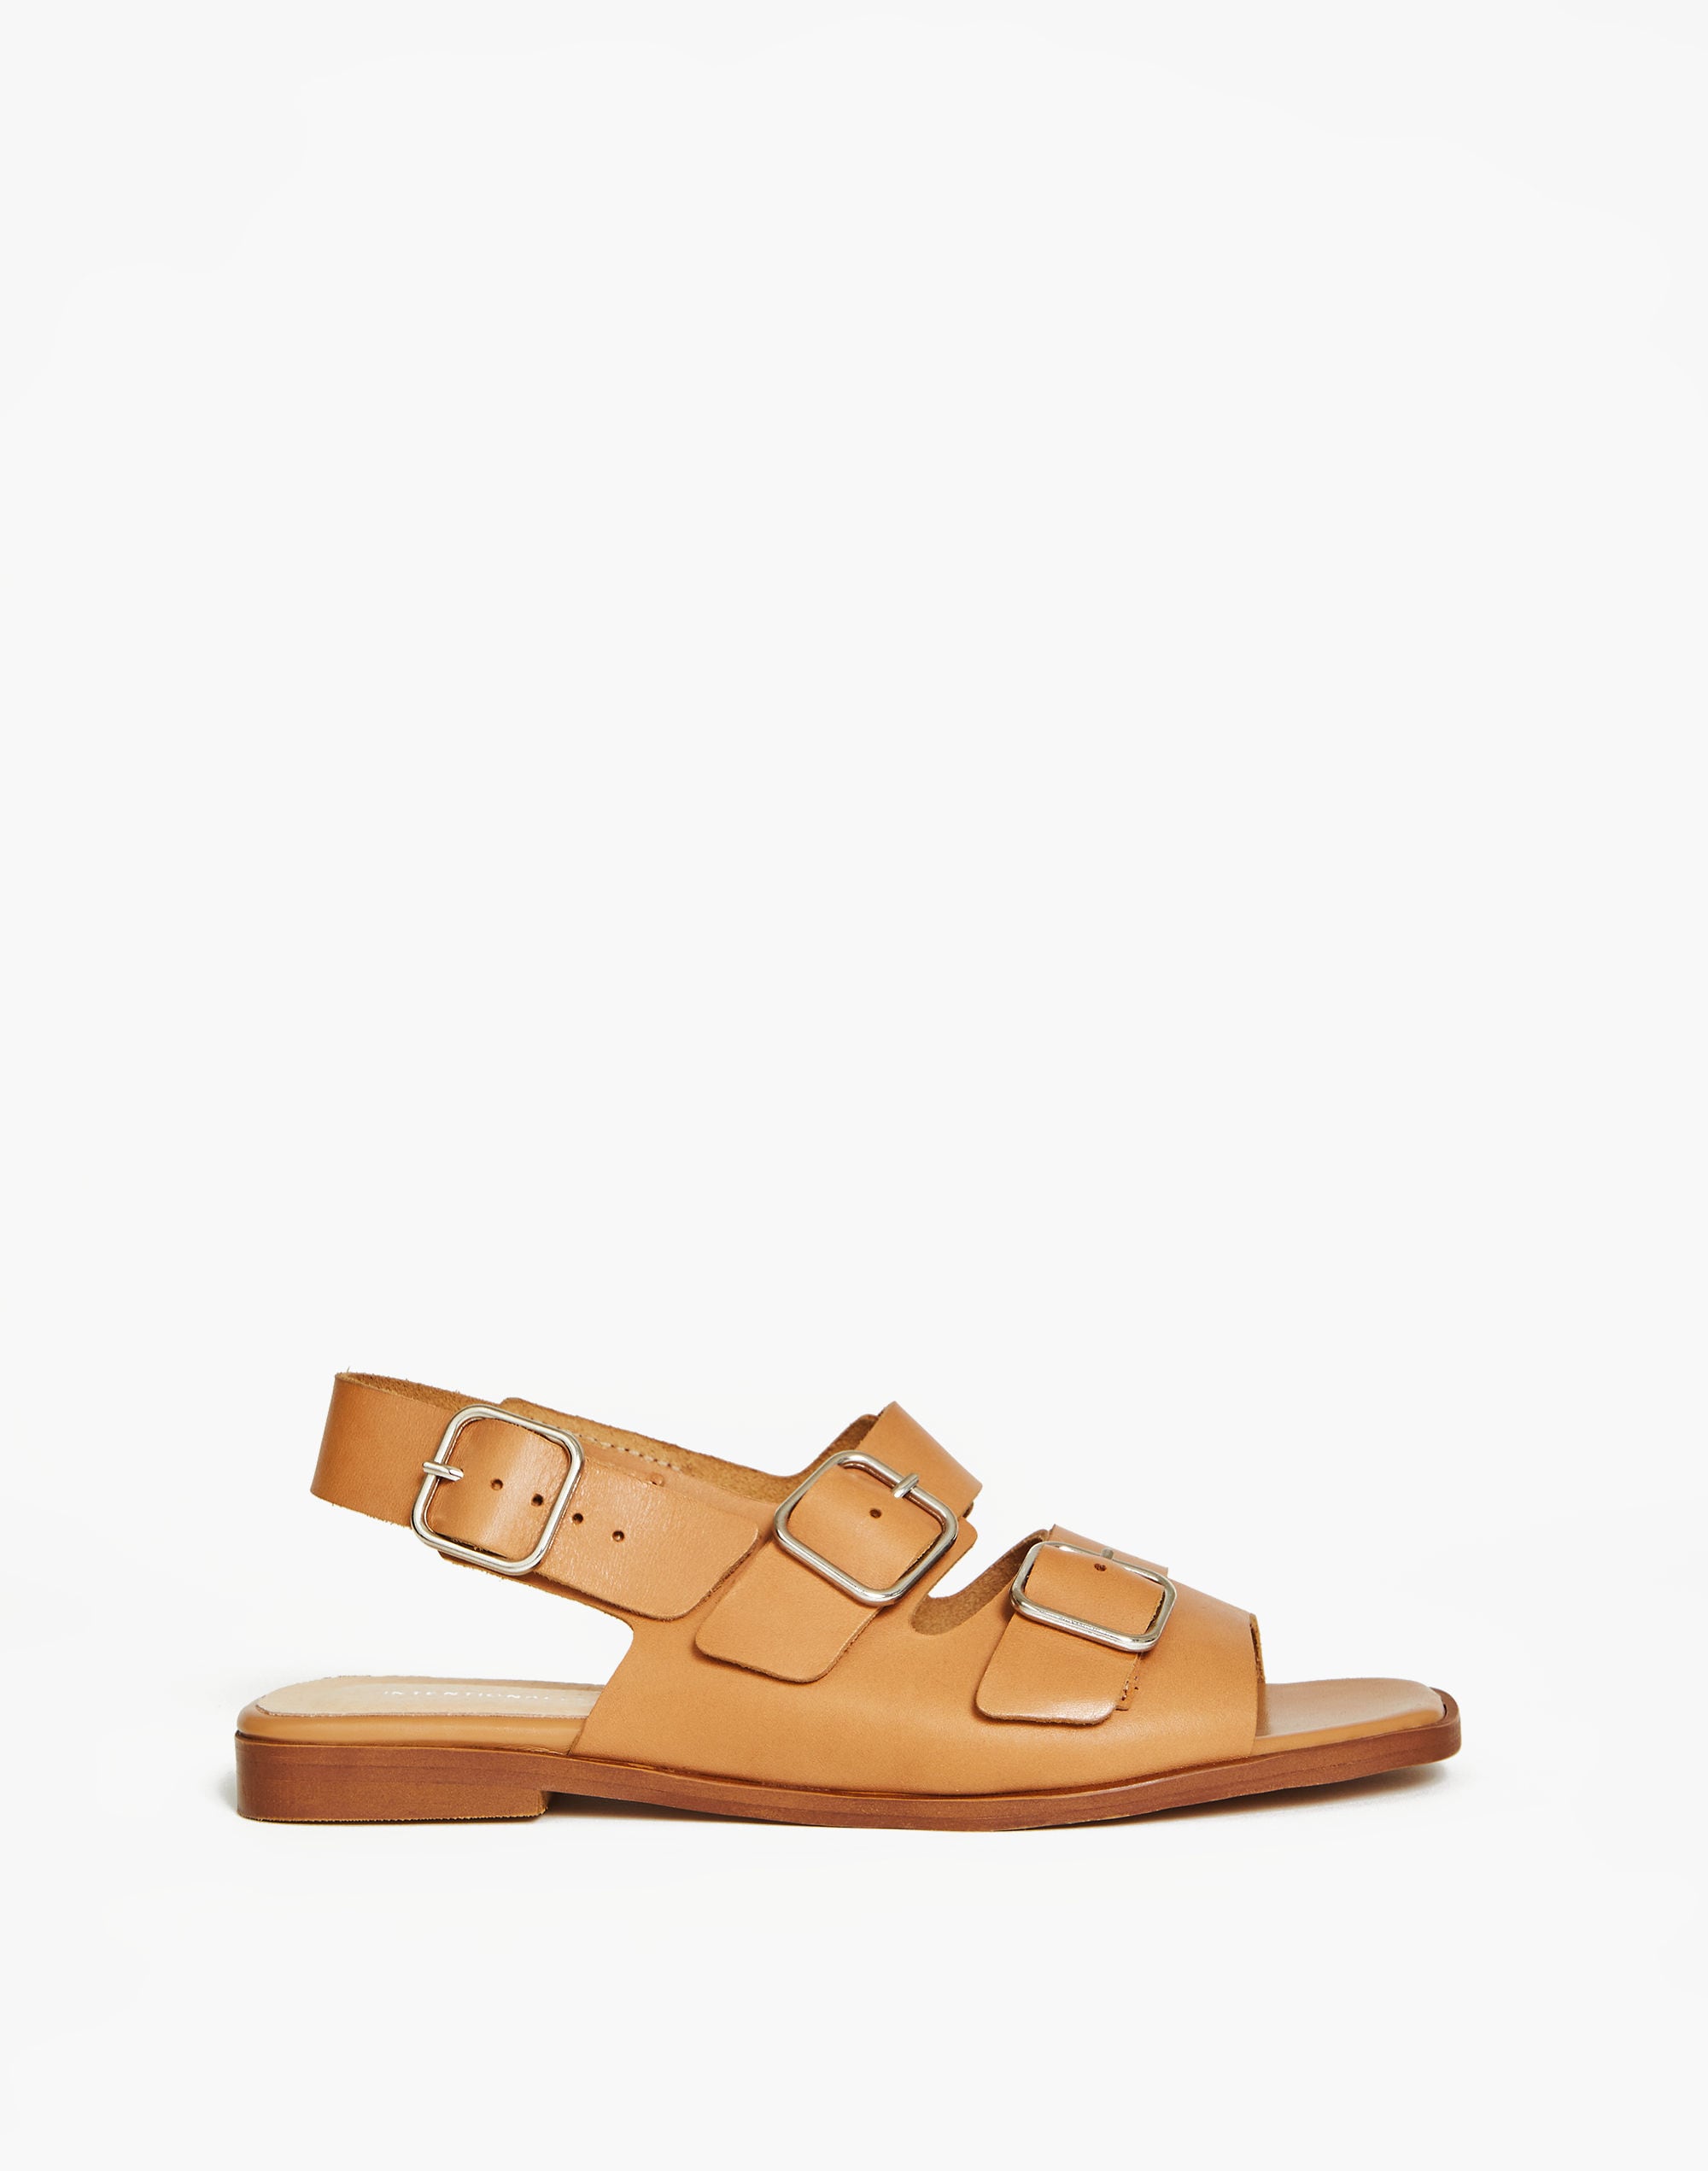 Intentionally Blank Leather Jiji Sandals in Tan